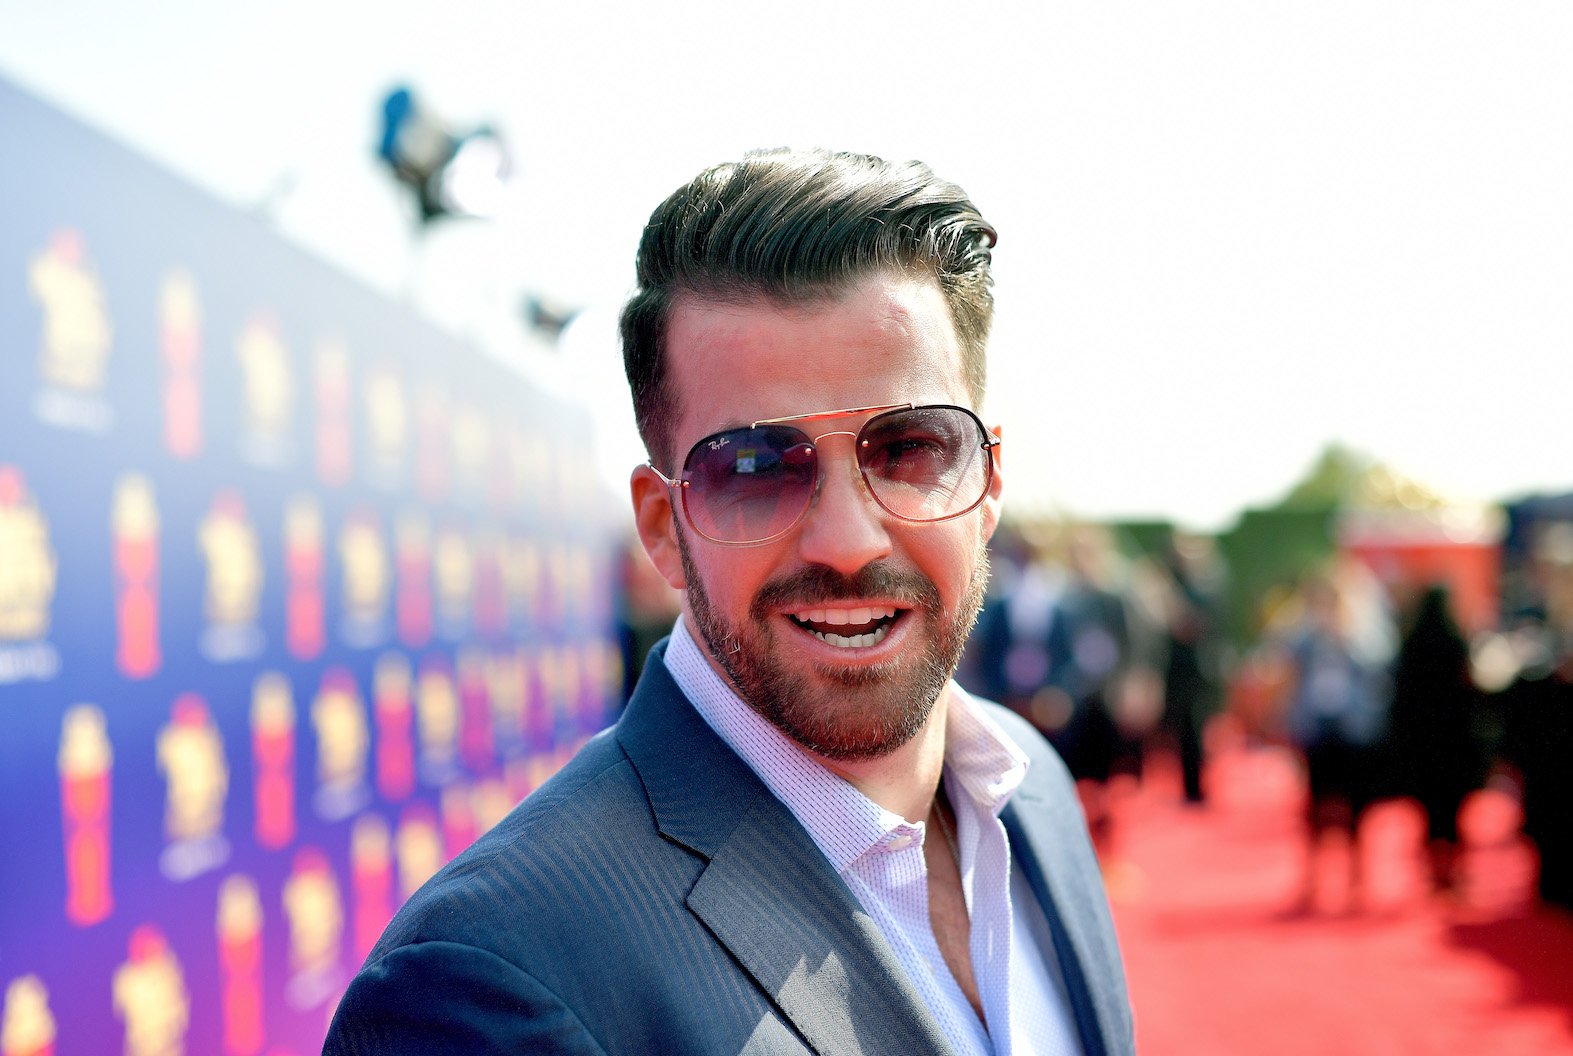 MTV's 'The Challenge' cast member Johnny 'Bananas' Devenanzio wearing sunglasses and a suit on the red carpet